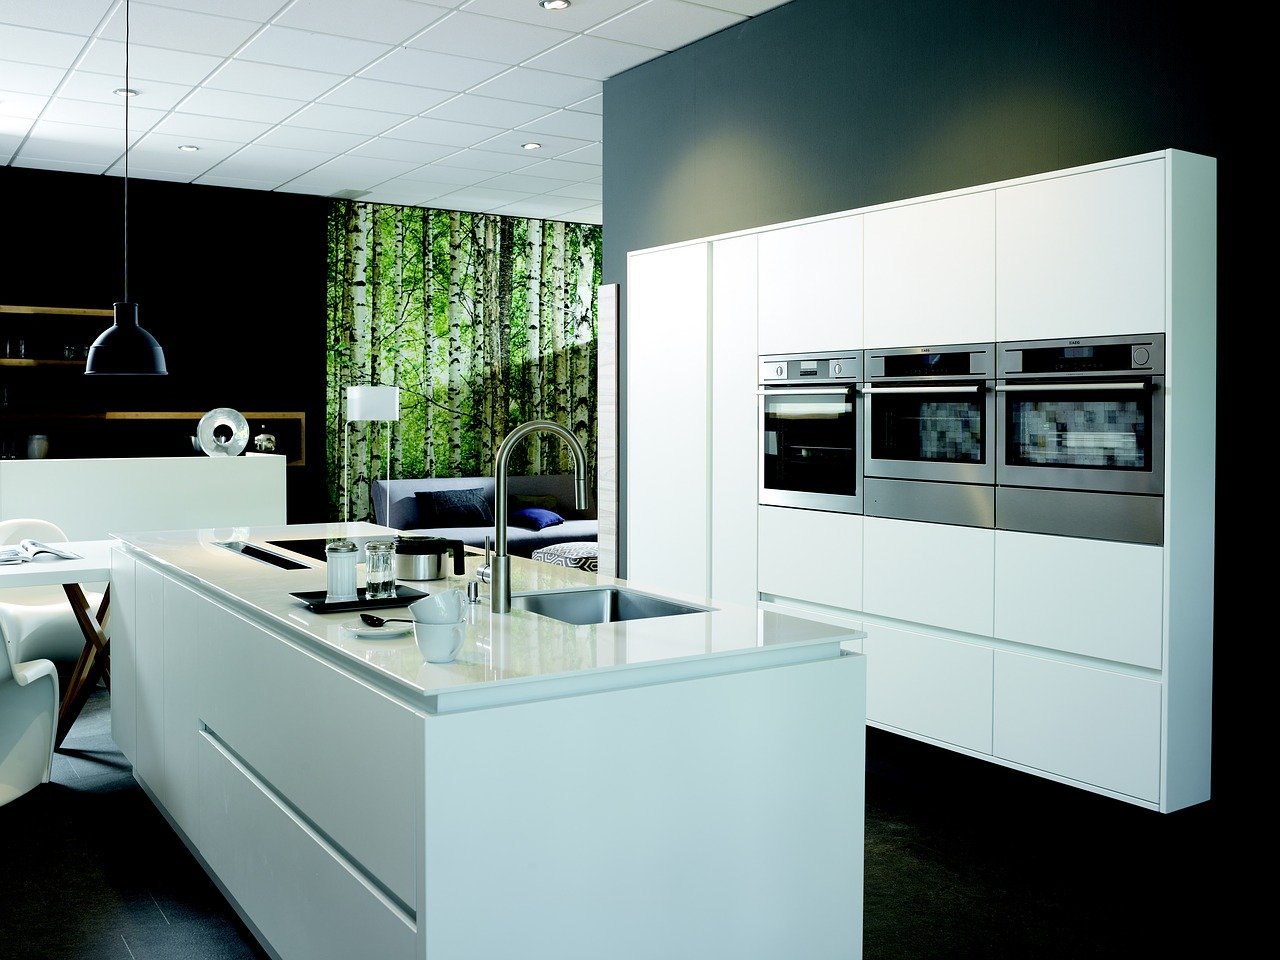 Black and white kitchen wall